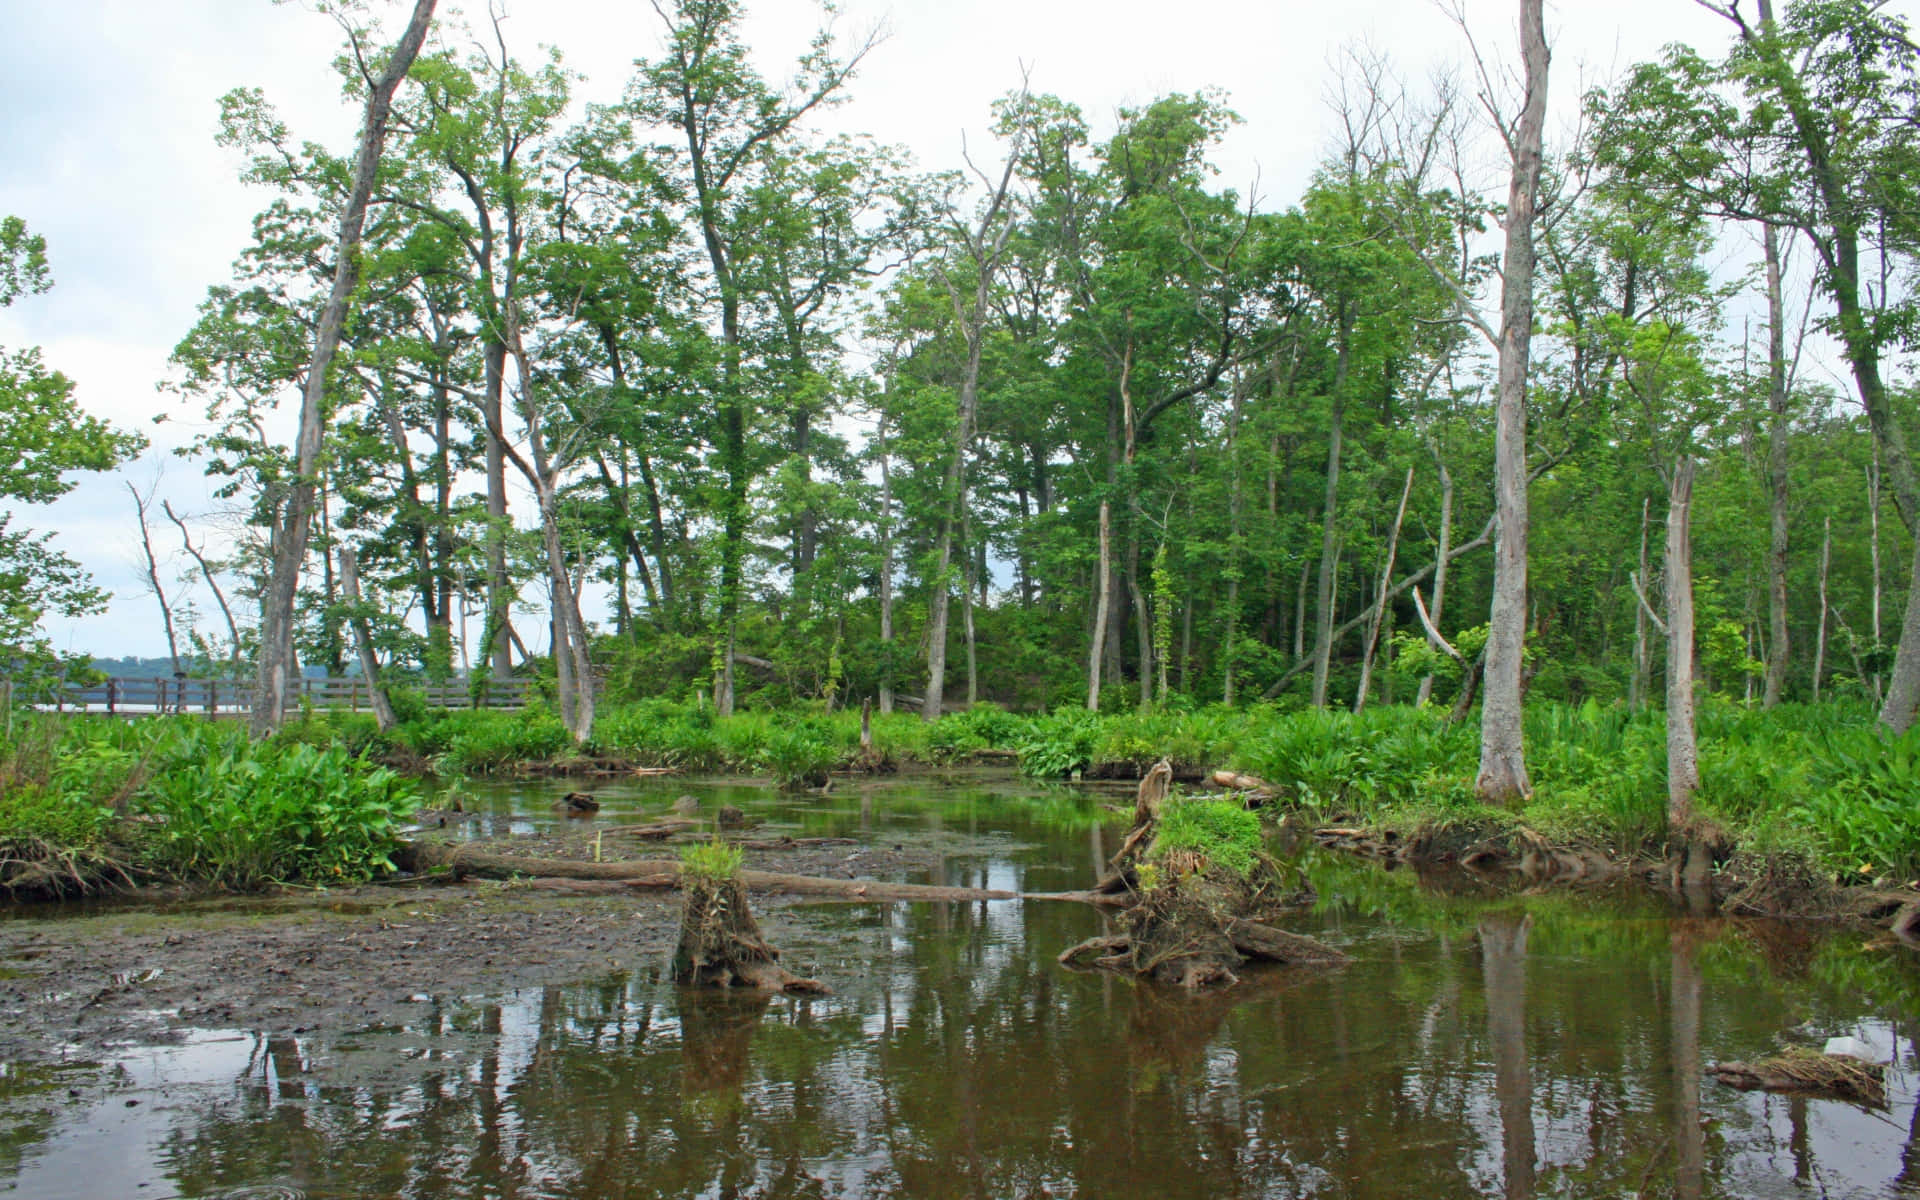 A Swamp With Trees And Mud